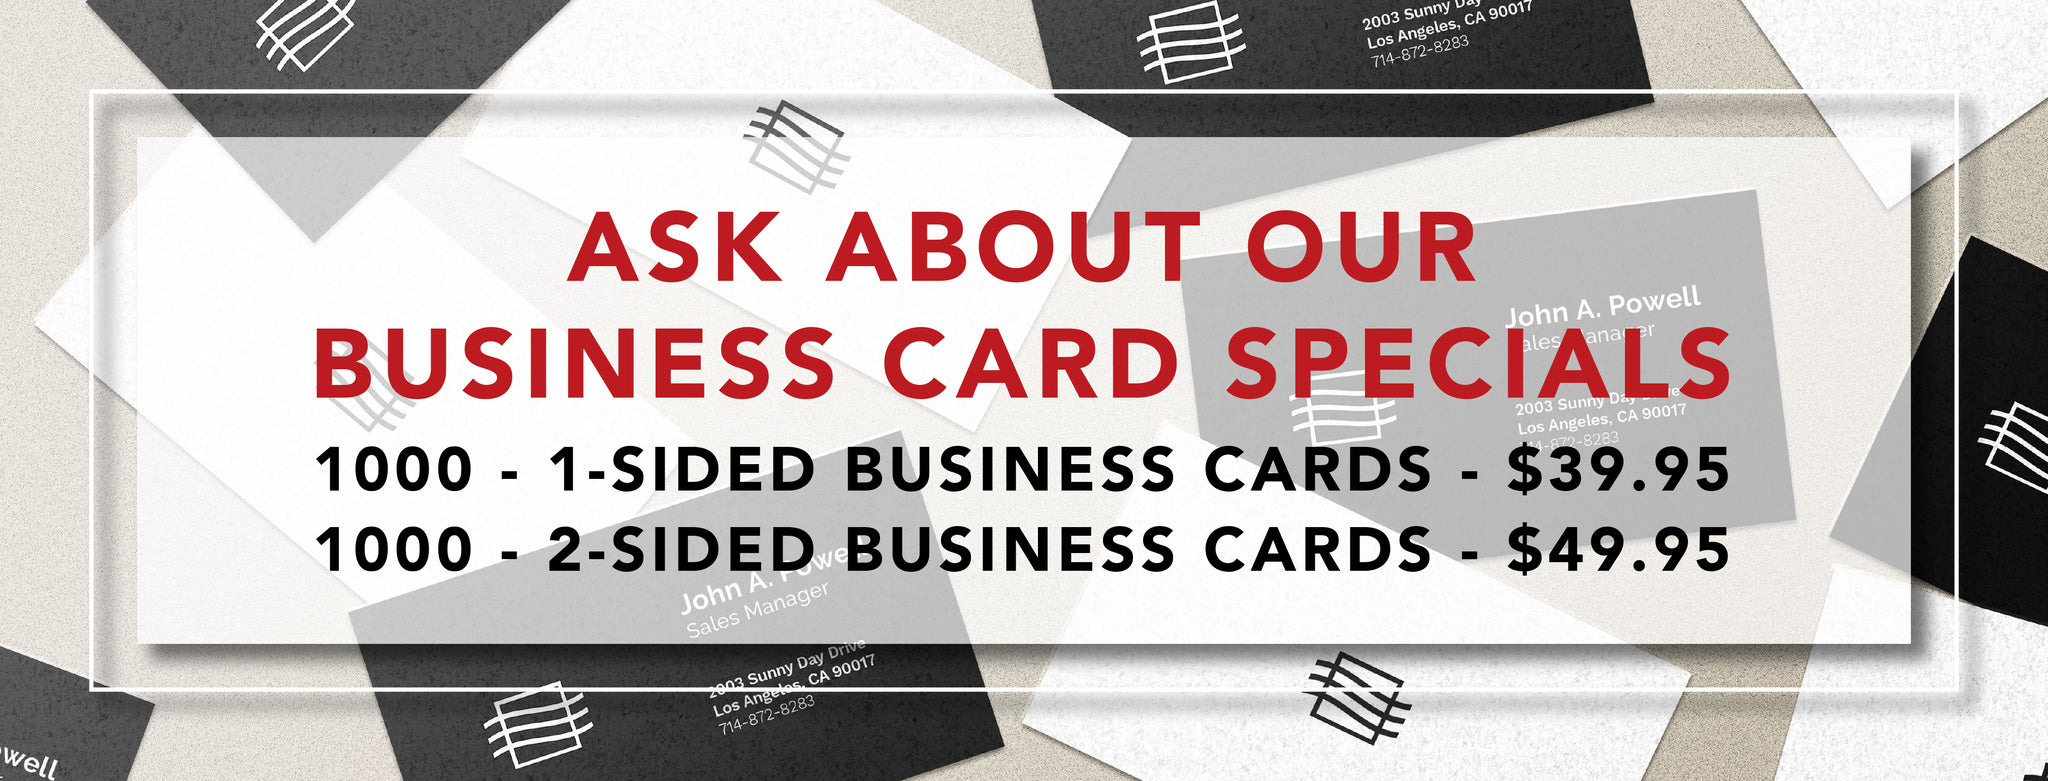 Business card specials starting at $39.95